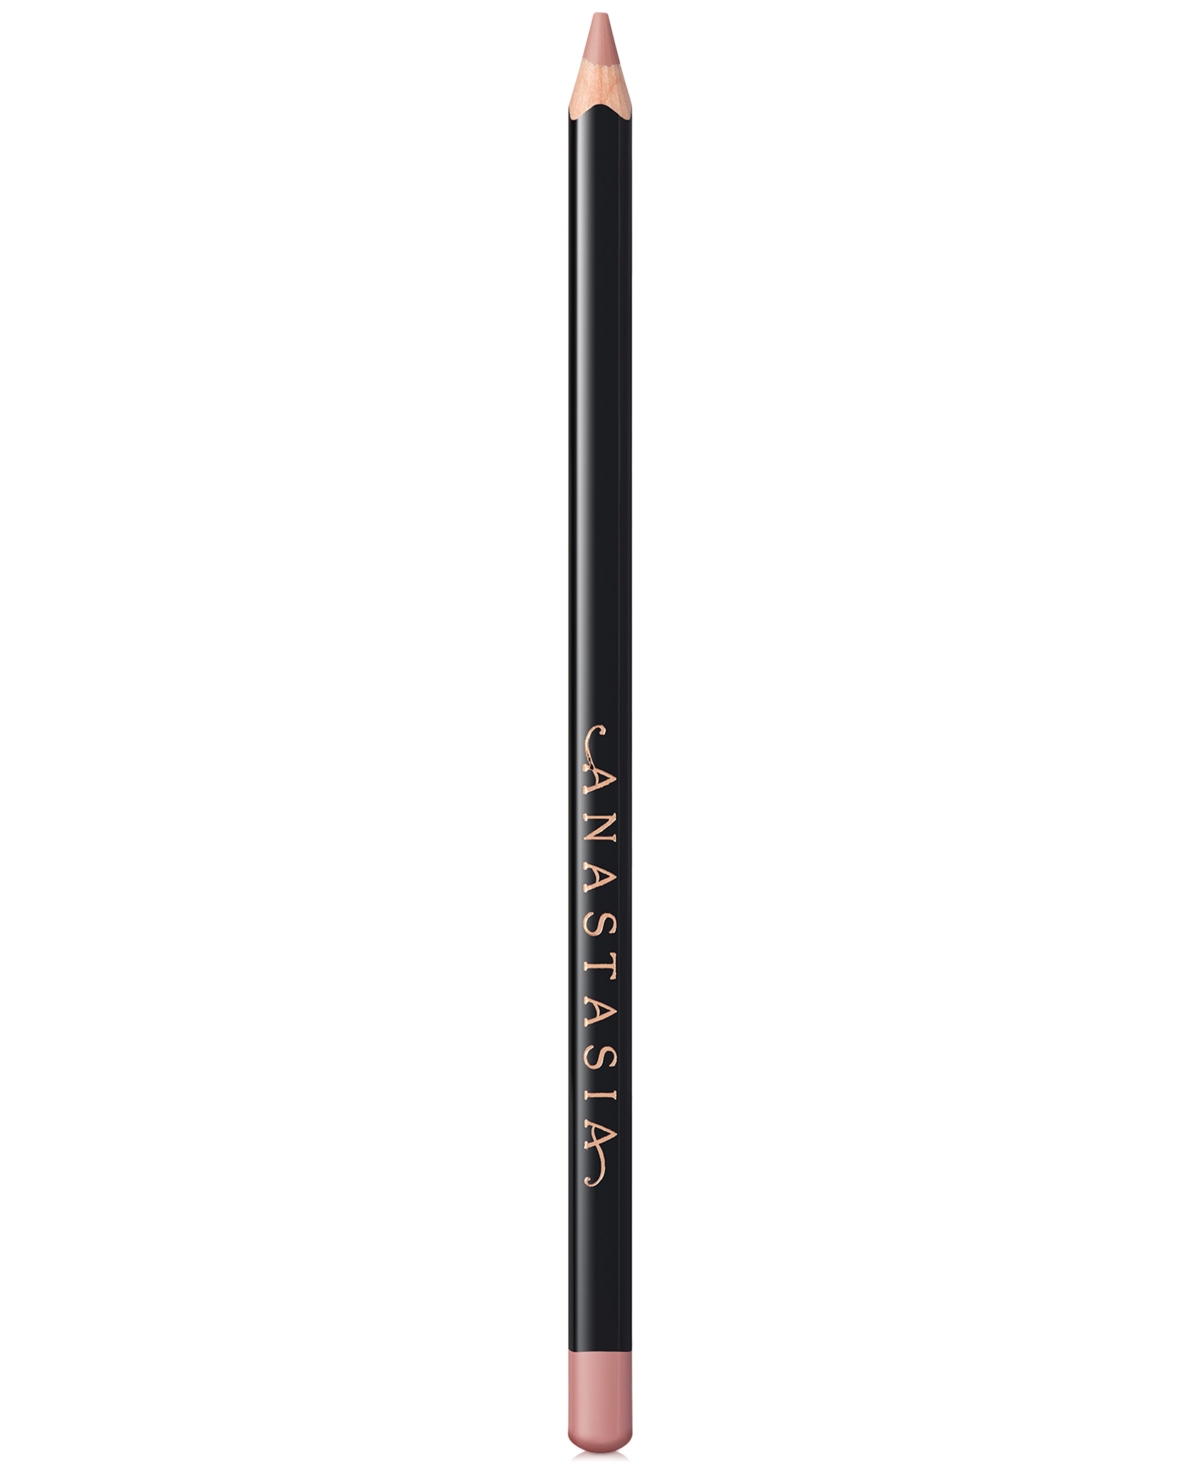 Anastasia Beverly Hills Lip Liner In Muted Mauve (nude Taupe Beige)